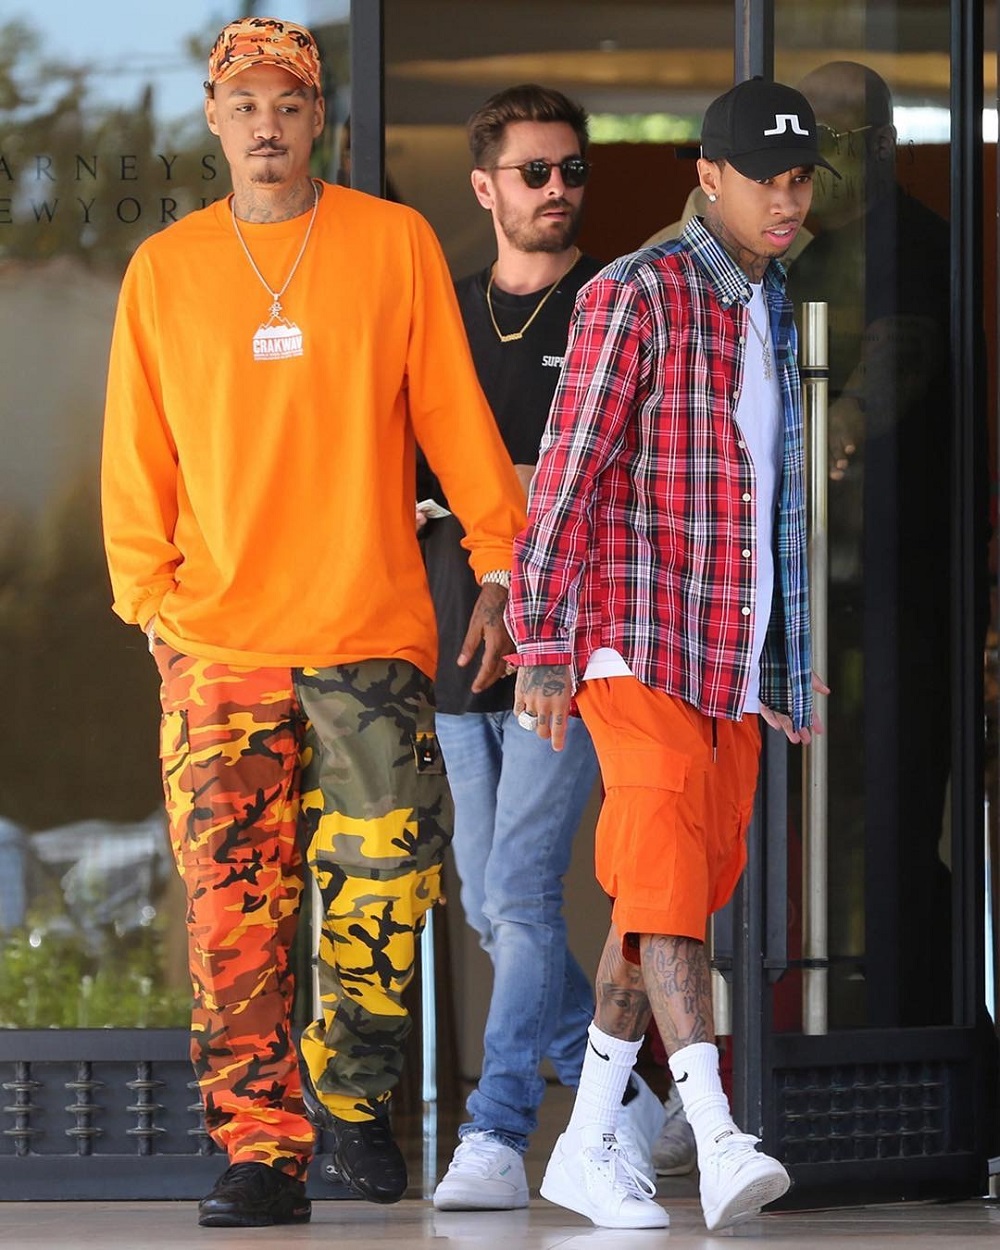 SPOTTED: Tyga in Palace Shirt, J Lindeberg Hat and Raf Simons x Adidas Sneakers